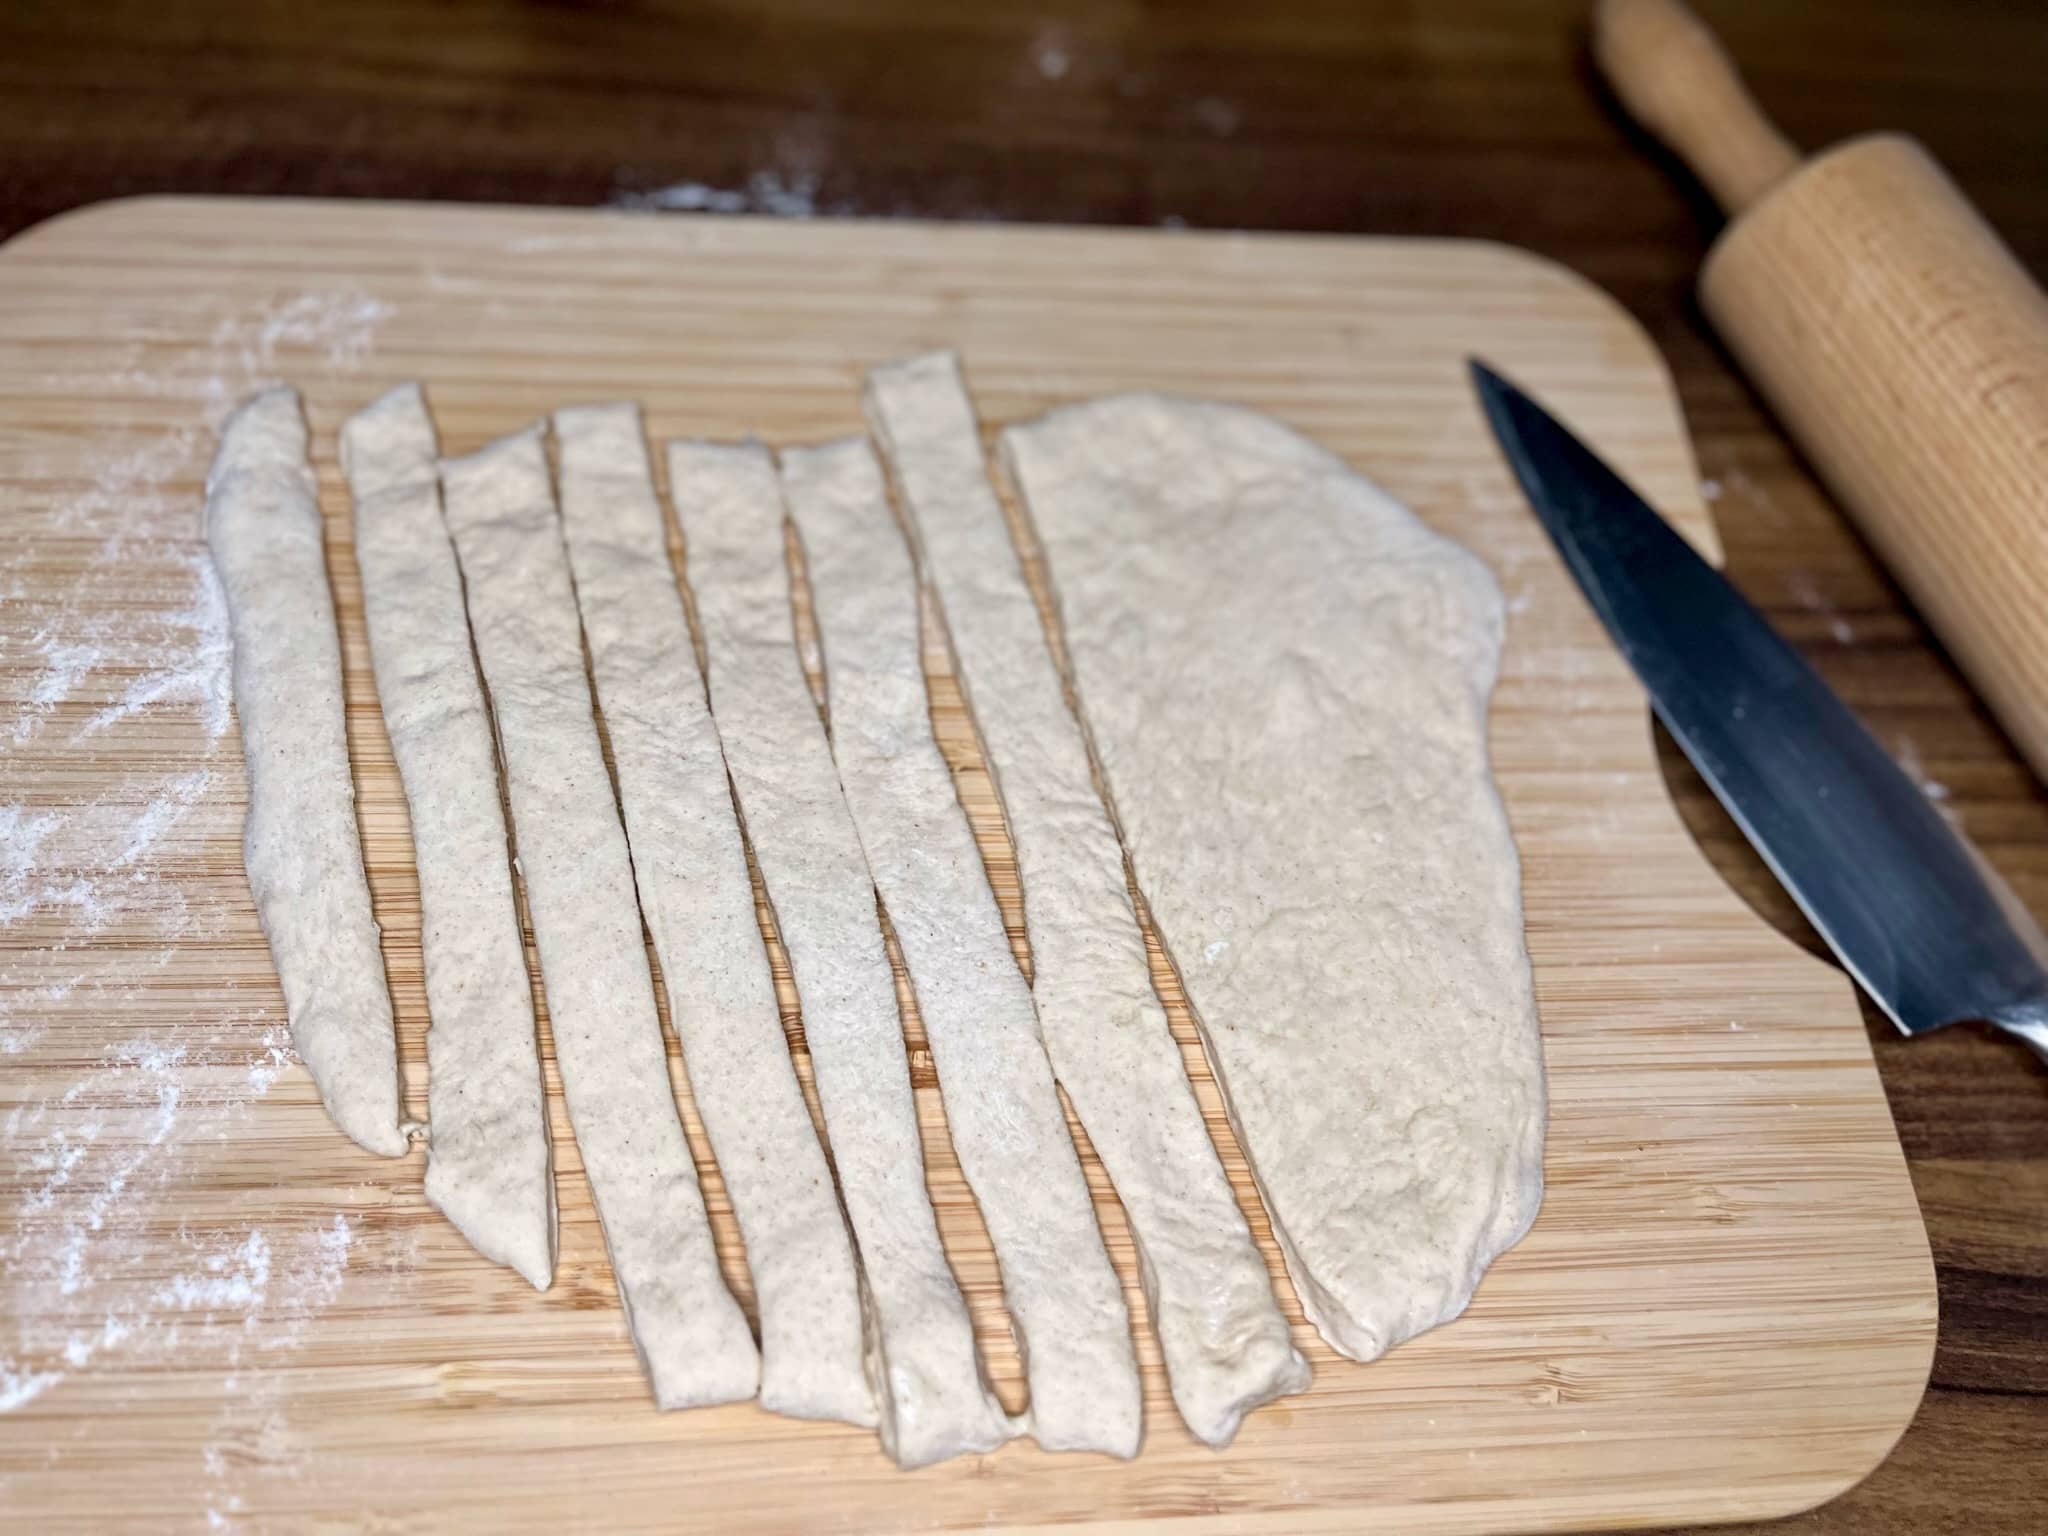 Dough rolled and cut into strips